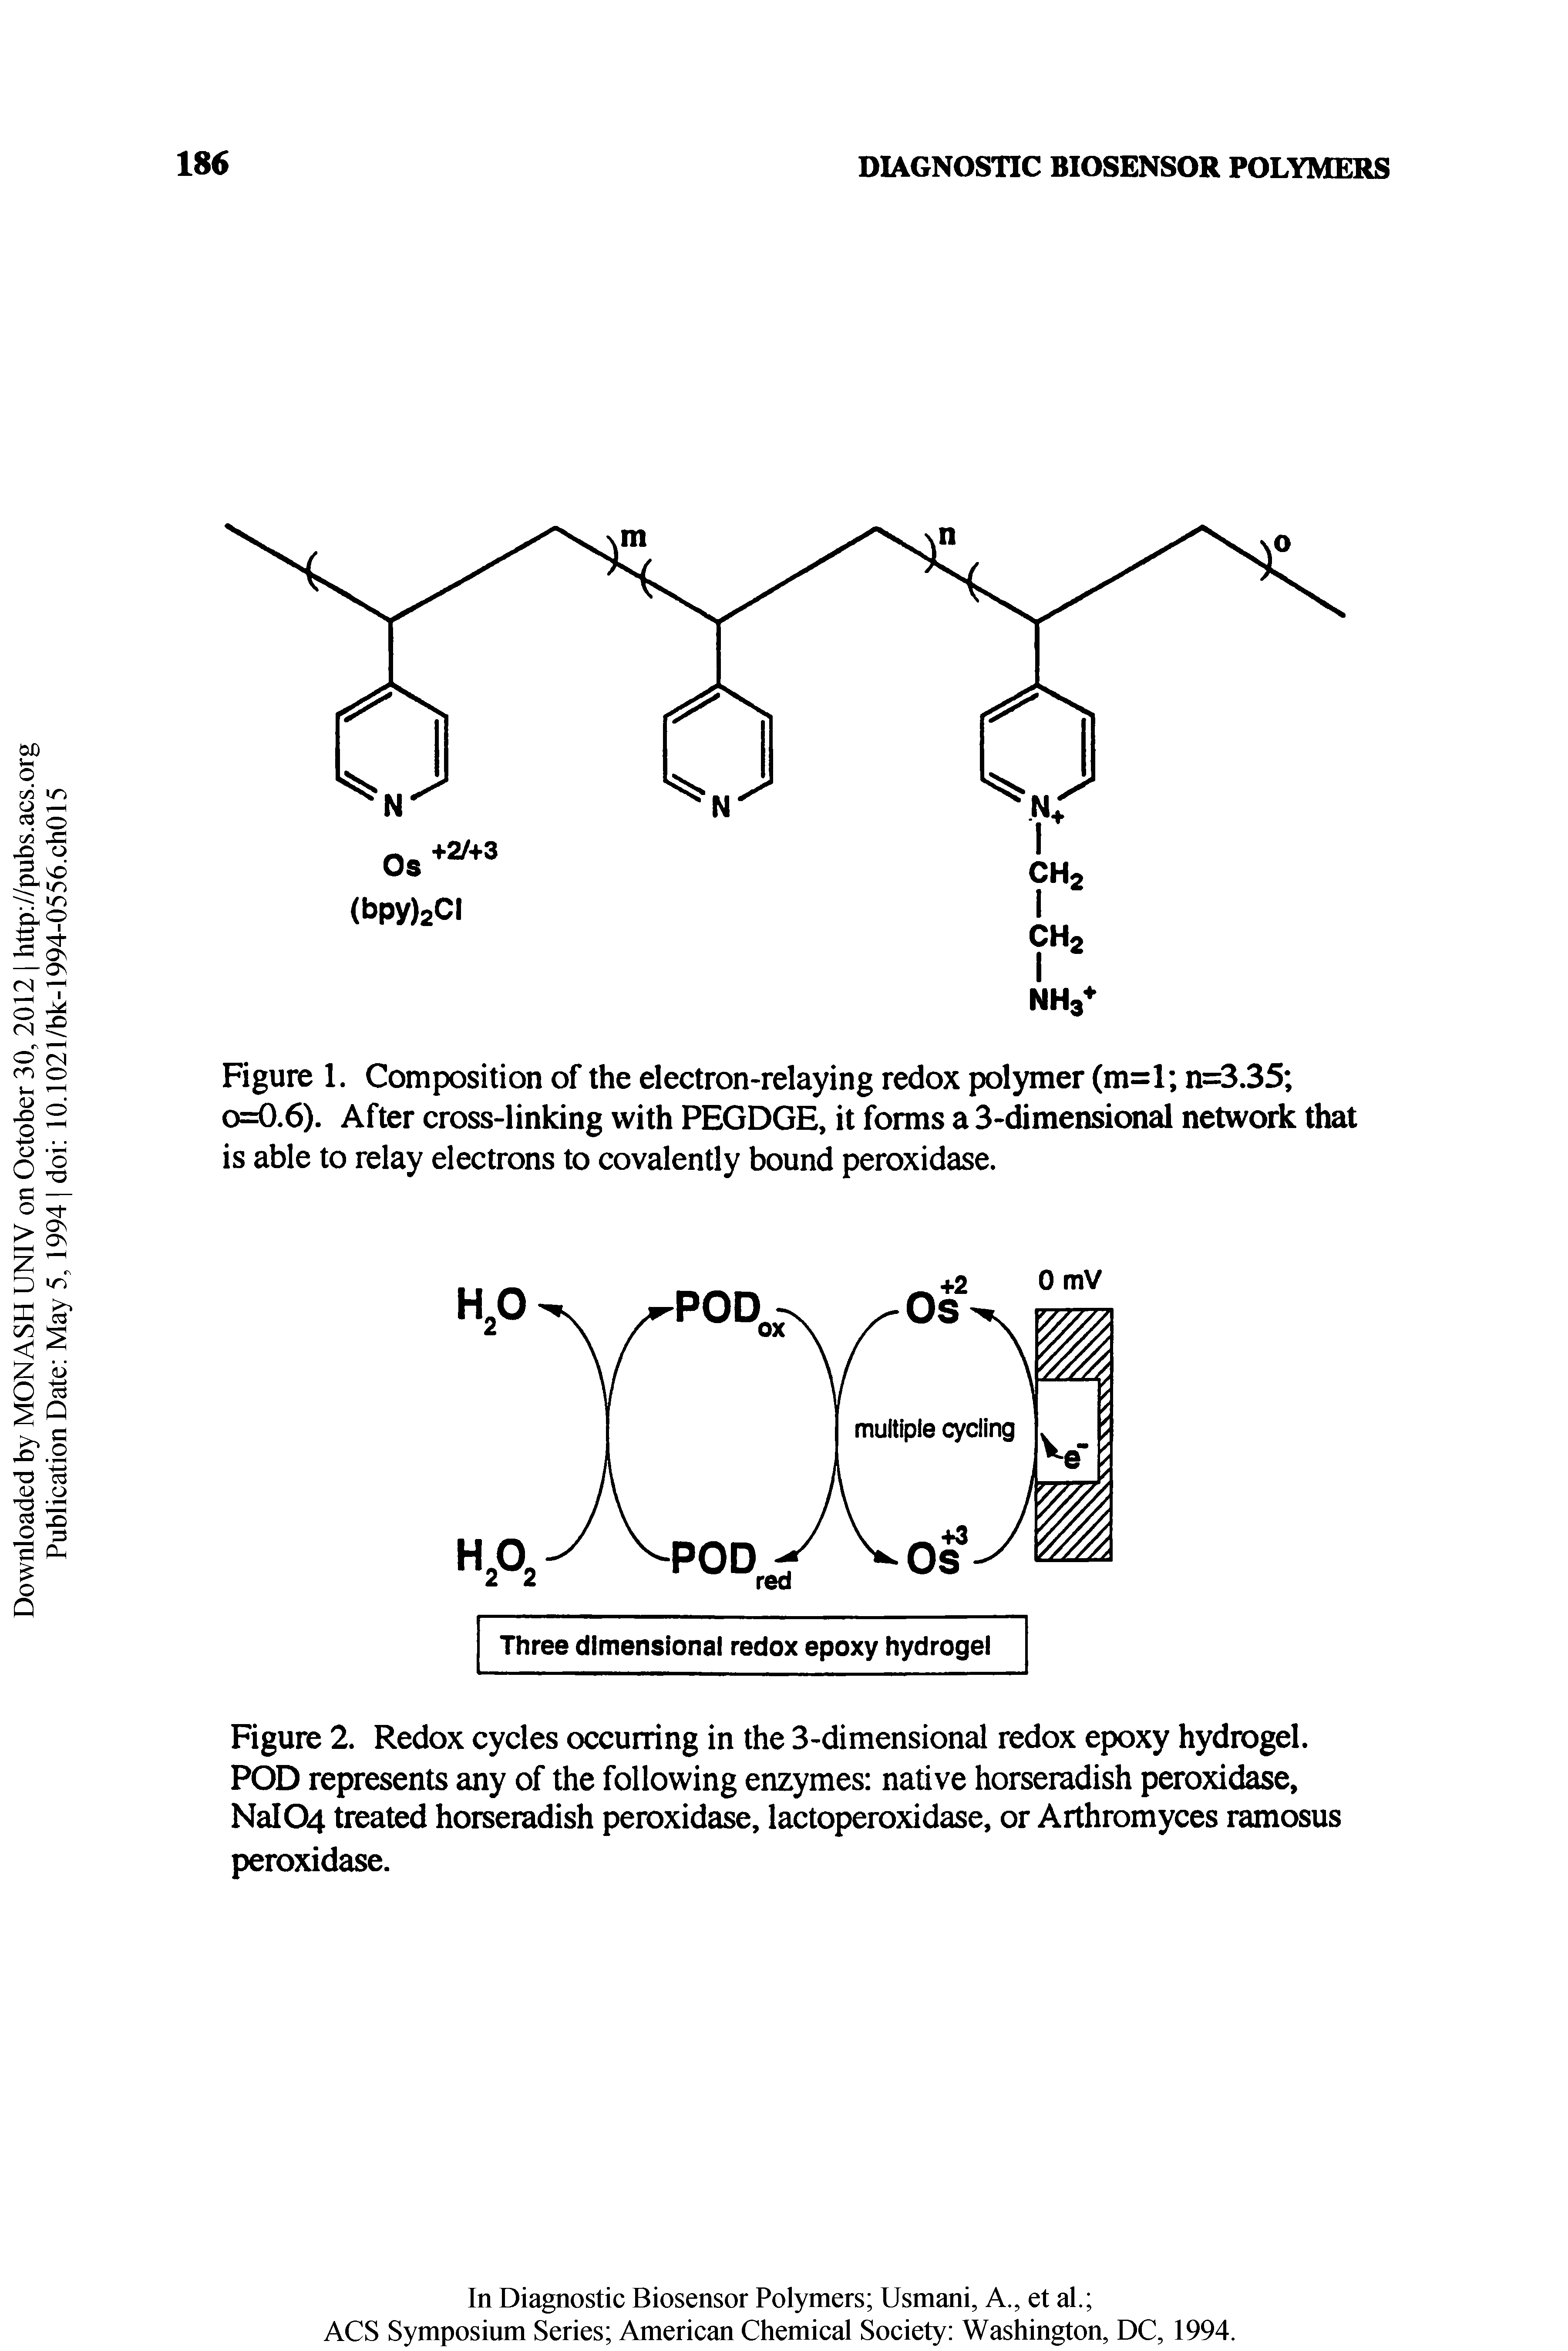 Figure 2. Redox cycles occurring in the 3-dimensional redox epoxy hydrogel. POD represents any of the following enzymes native horseradish peroxidase, NaI04 treated horseradish peroxidase, lactoperoxidase, or Arthromyces ramosus peroxidase.